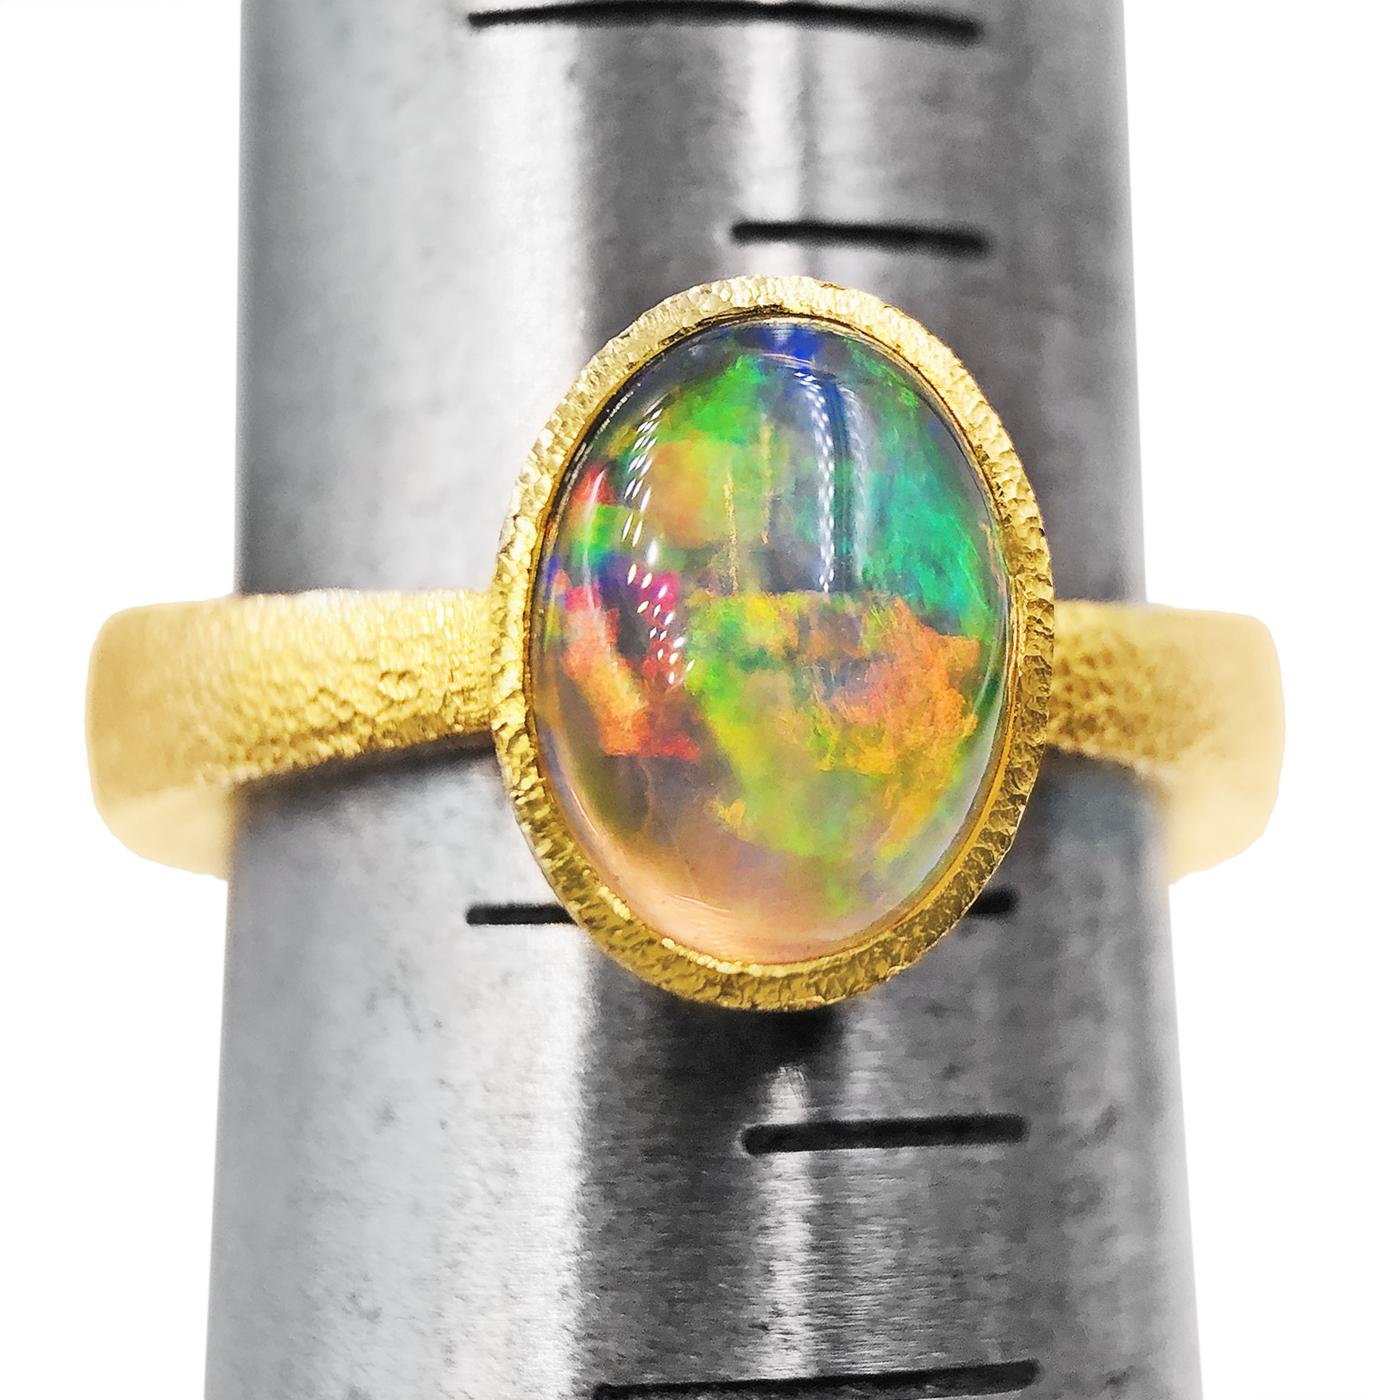 Artist Devta Doolan Exceptional Mexican Crystal Rainbow Opal One of a Kind Gold Ring